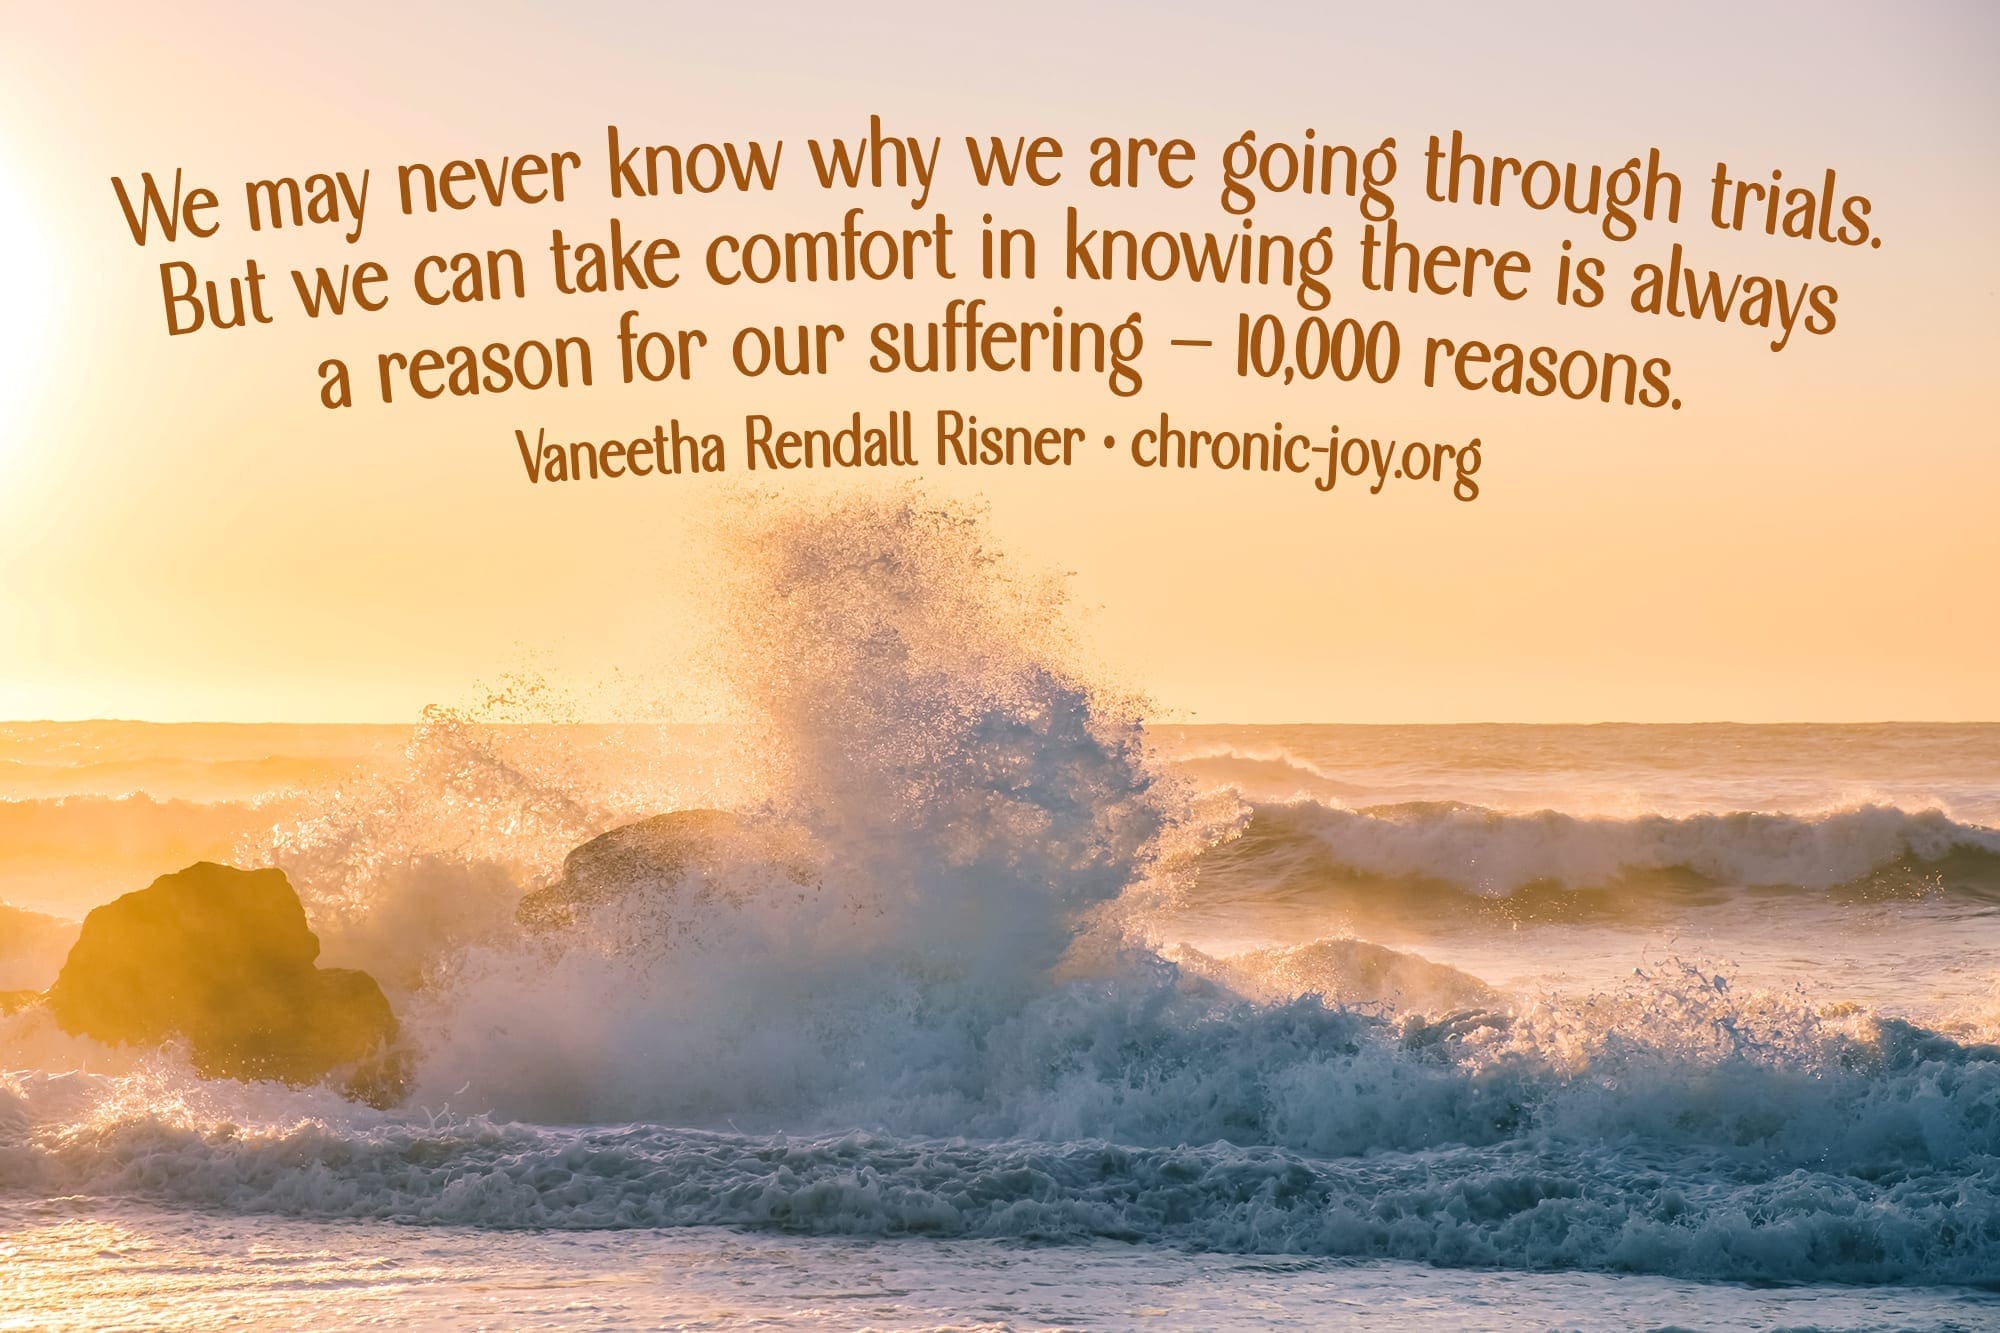 "We may never know why we are going through trials. But we can take comfort in knowing there is always a reason for our suffering — 10,000 reasons." Vaneetha Rendall Risner